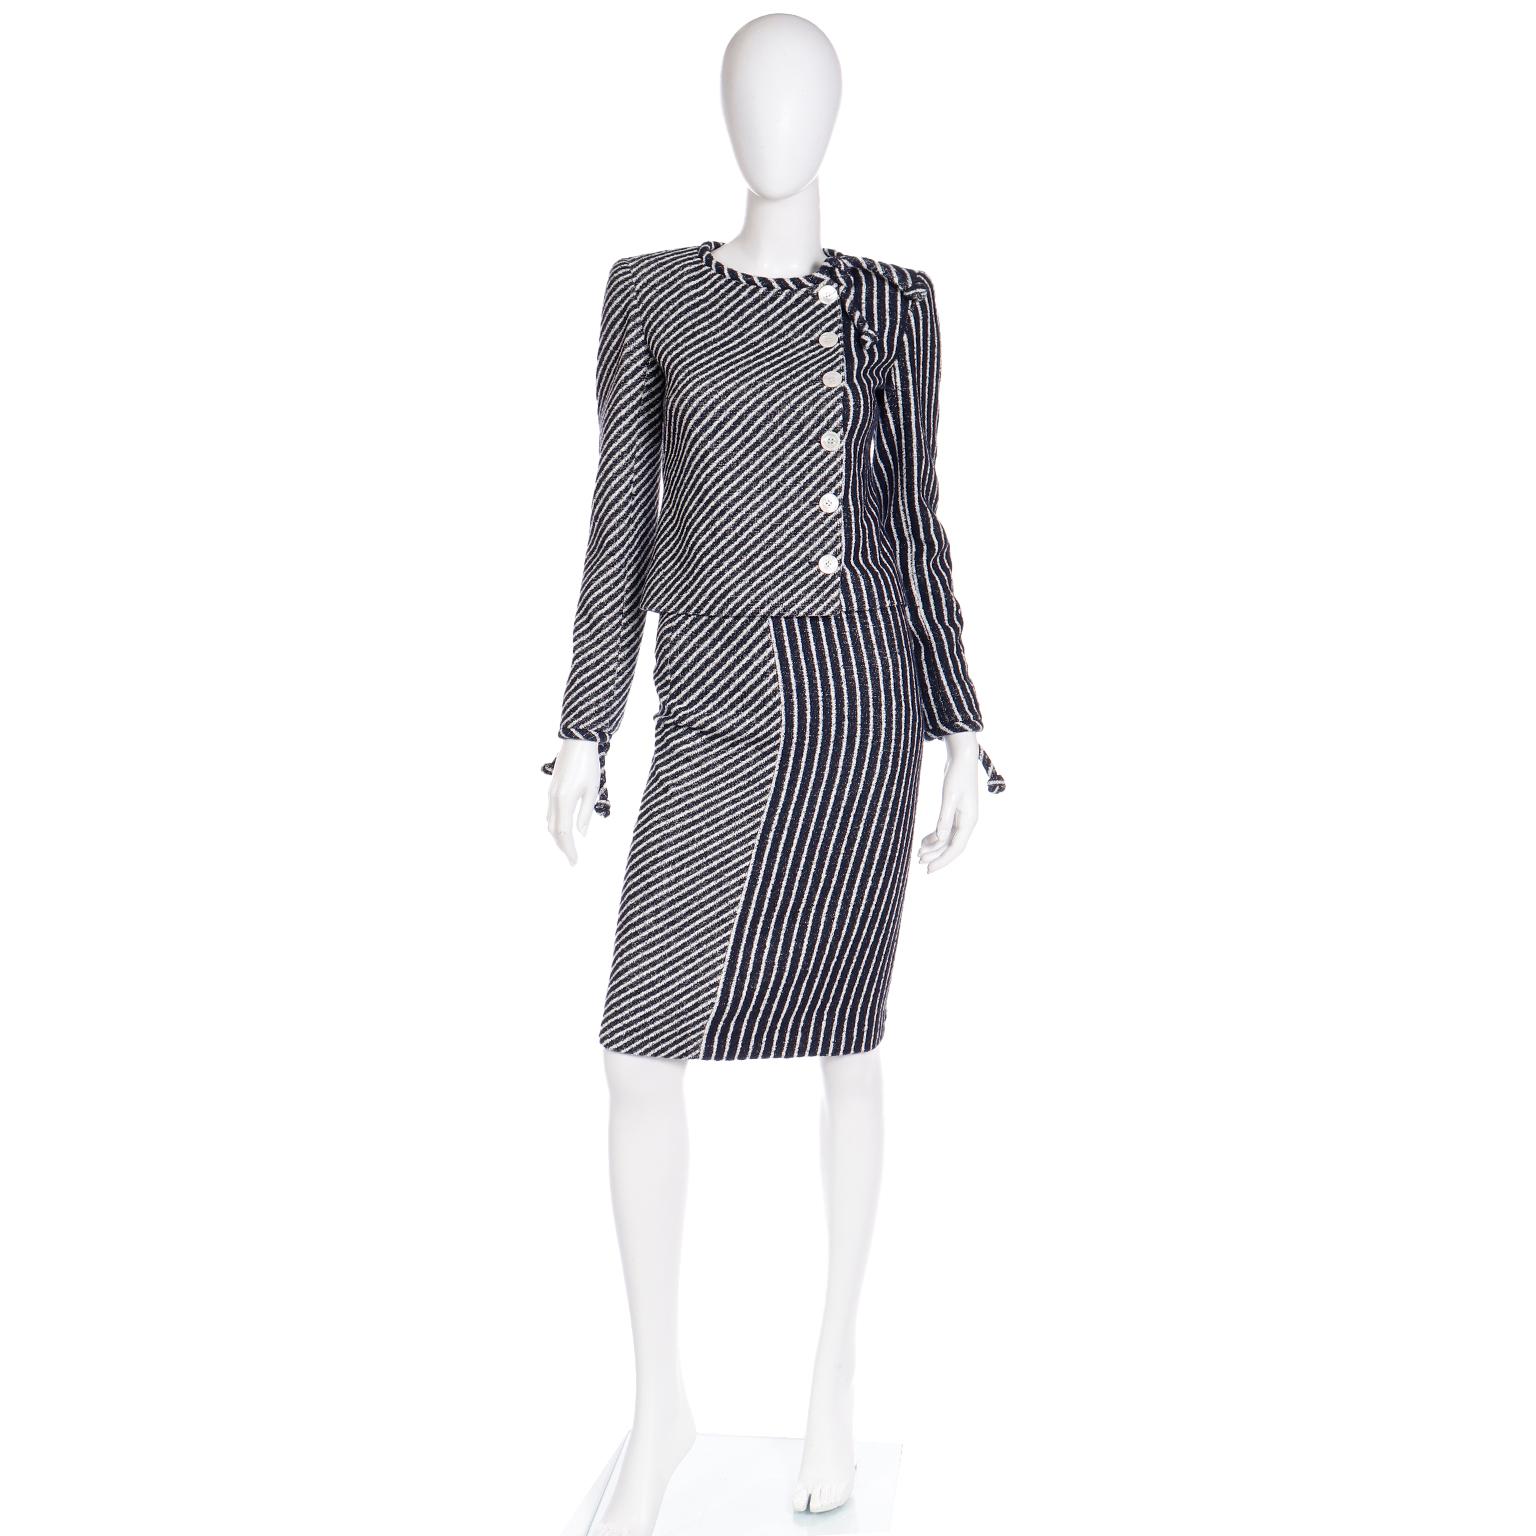 We think this 2 piece Valentino ensemble is the perfect, stylish summer suit! This outfit includes a Jacket and a Skirt in a navy blue and white striped textured woven fabric.. The collarless jacket has shoulder pads for structure, a tie at the